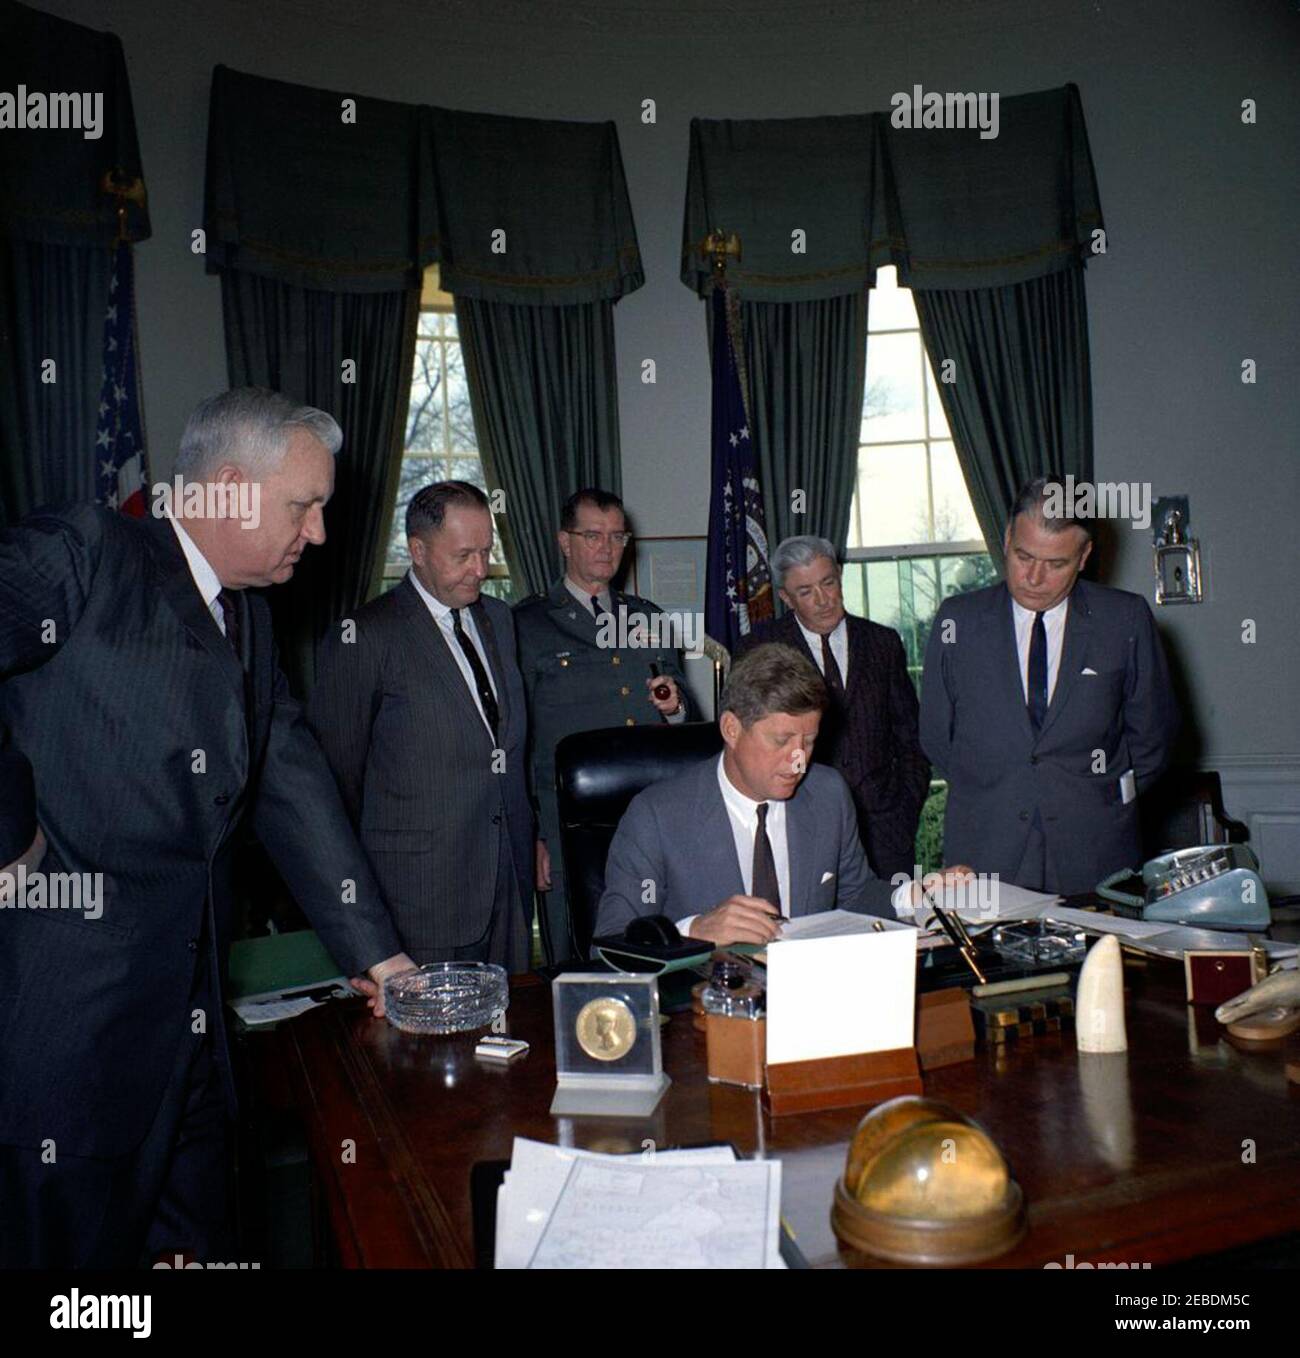 President Kennedy signs emergency flood relief measures for Kentucky counties, 11:30AM. President John F. Kennedy (seated at desk) signs emergency flood relief measures for Kentucky counties in the Oval Office of the White House, Washington, D.C. Standing (L-R): Congressman Carl D. Perkins (Kentucky); Congressman John C. Watts (Kentucky); Adjutant General of Kentucky, A. Y. Lloyd; Administrative Assistant to Congressman Watts, Paul Kelly; Governor of Kentucky, Bert T. Combs. Stock Photo